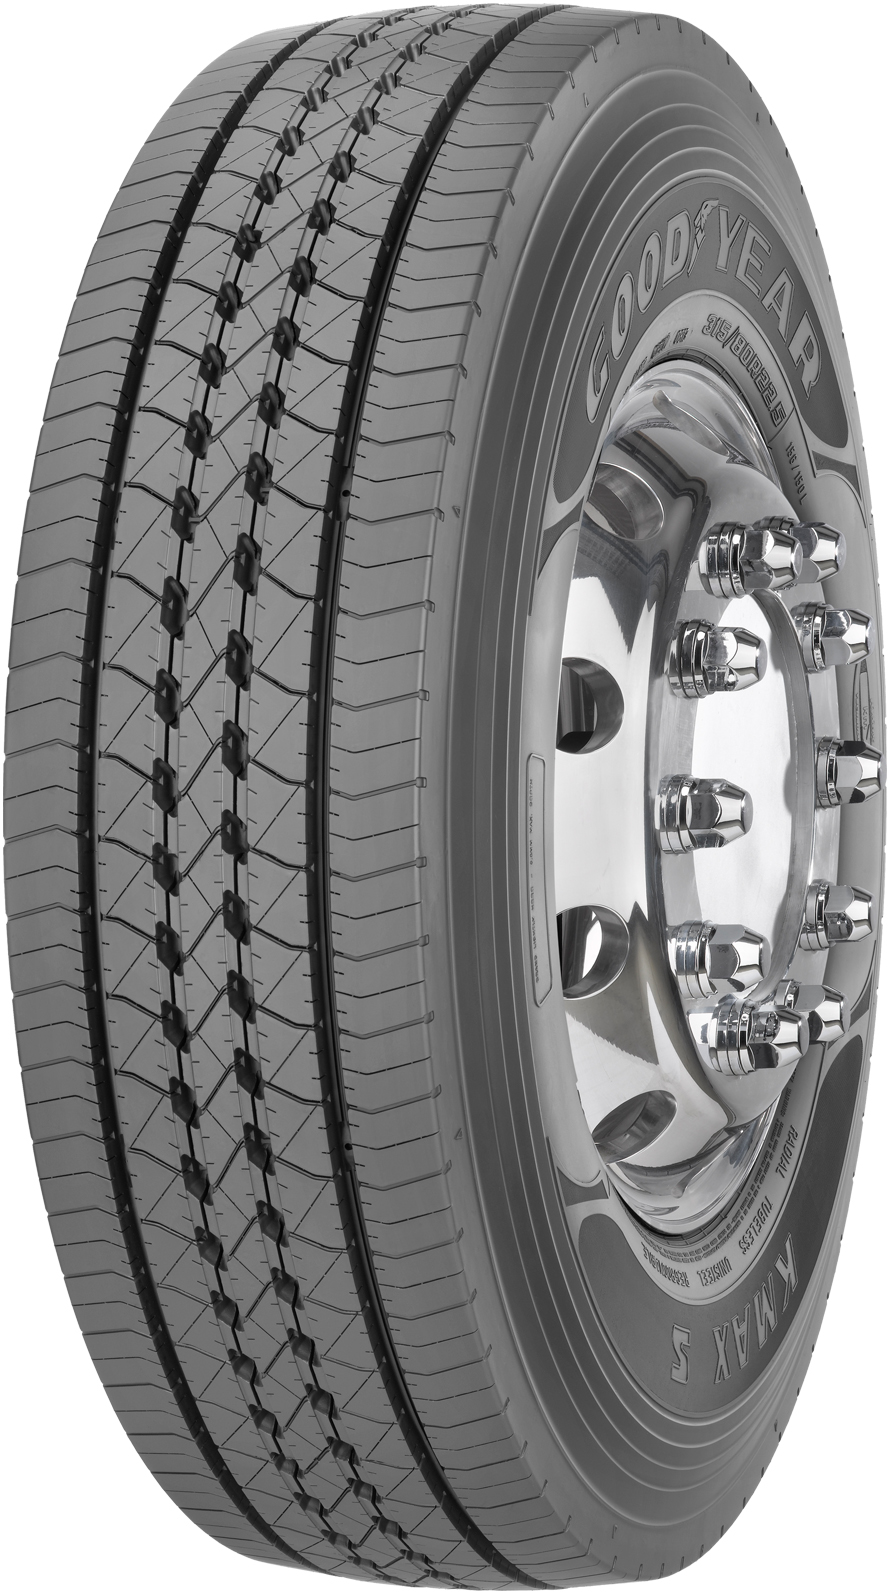 product_type-heavy_tires GOODYEAR KMAX S 16 TL 245/70 R19.5 136M